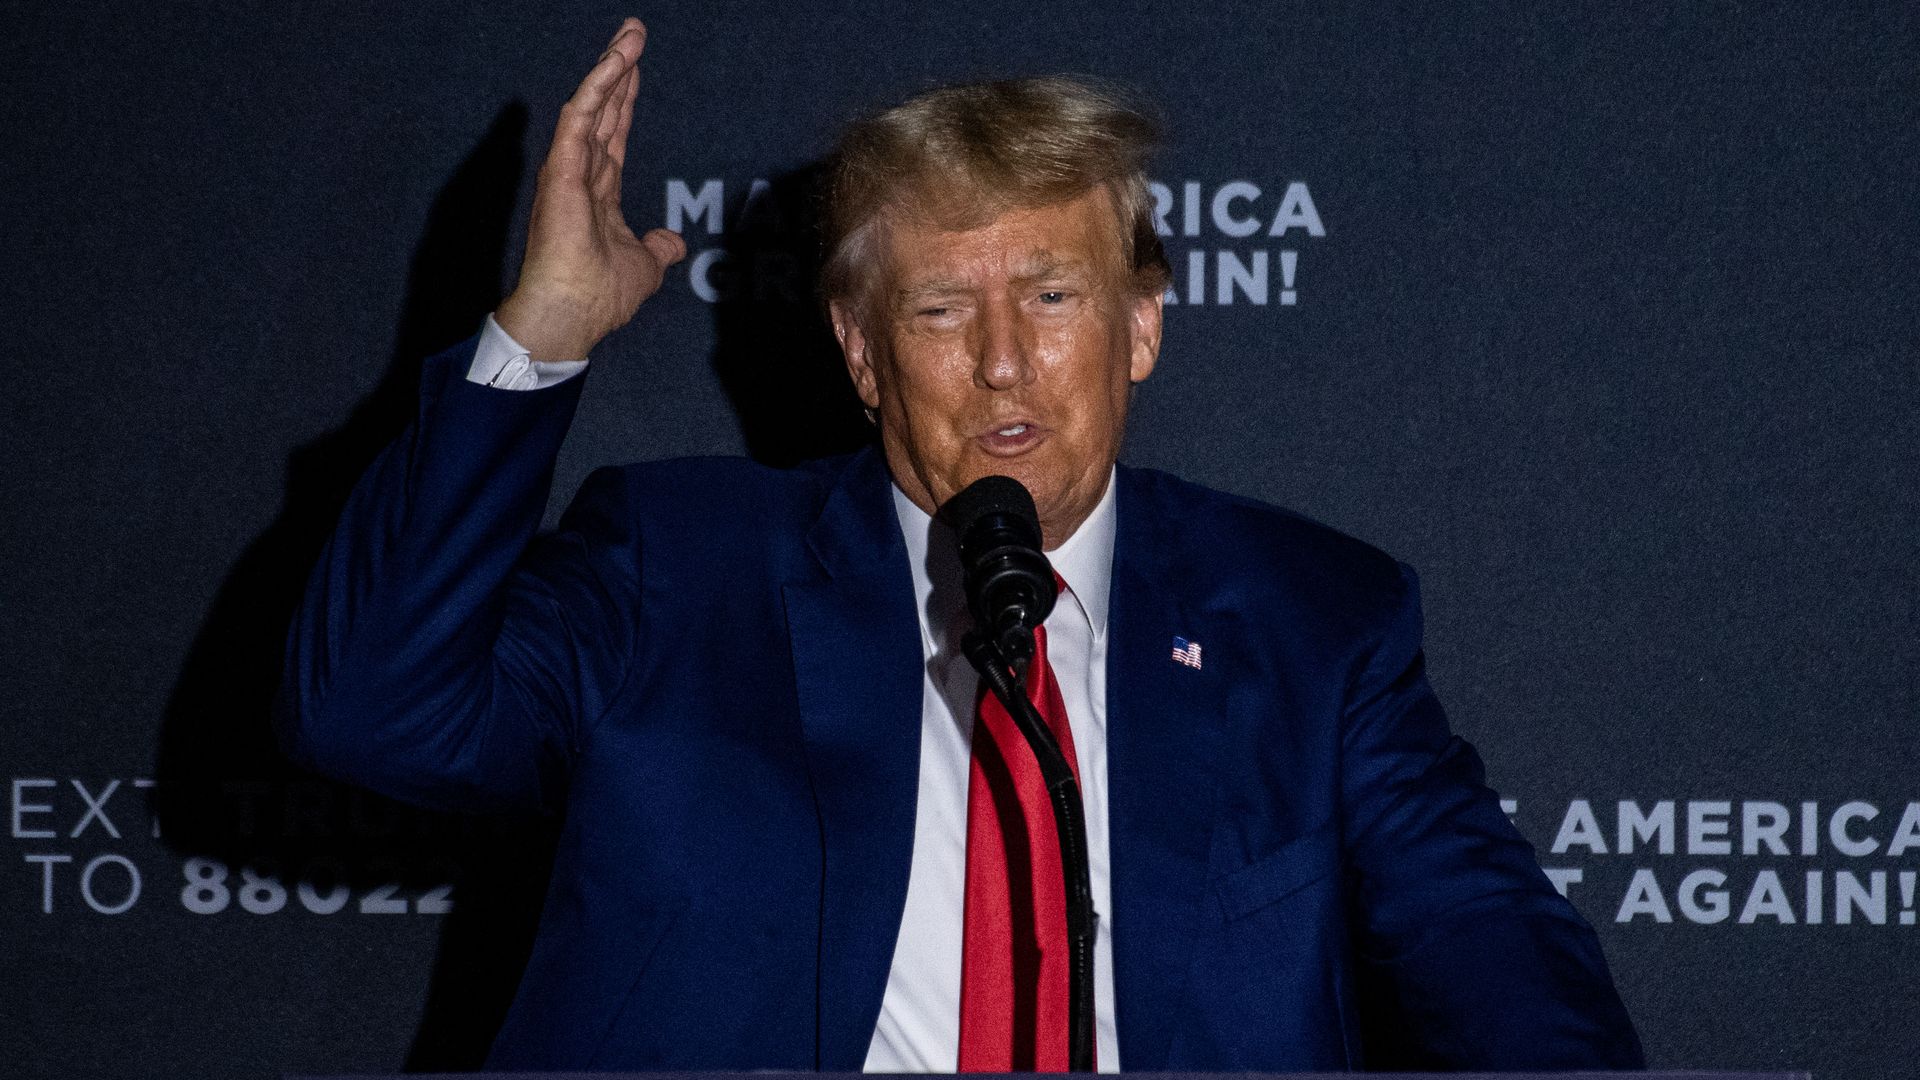 Trump speaking at a rally in front of a backdrop that says "Make America Great Again!" He wears a blue suit and red tie. One of his arms is in the air as he speaks.